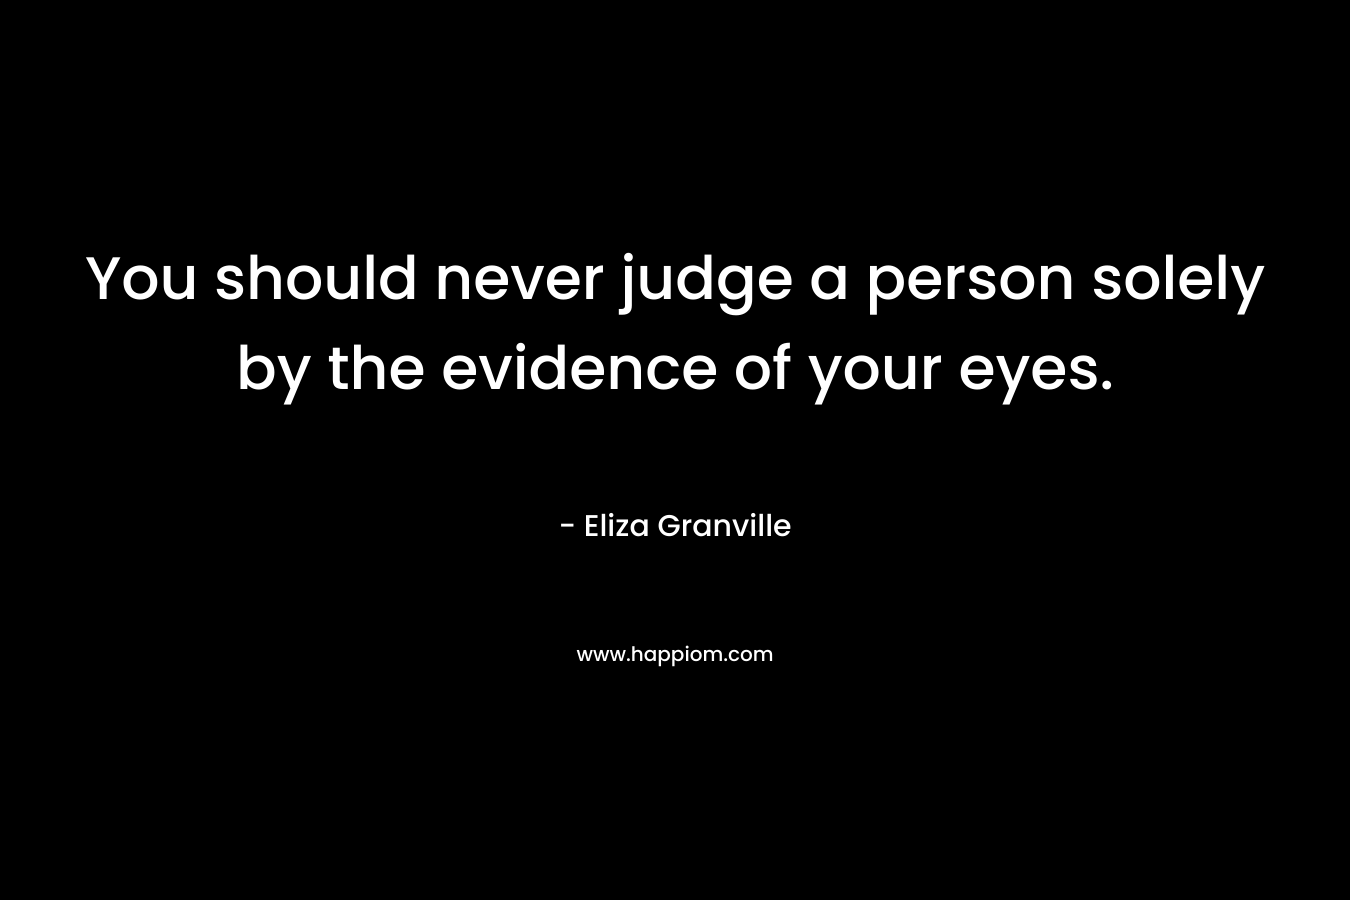 You should never judge a person solely by the evidence of your eyes.